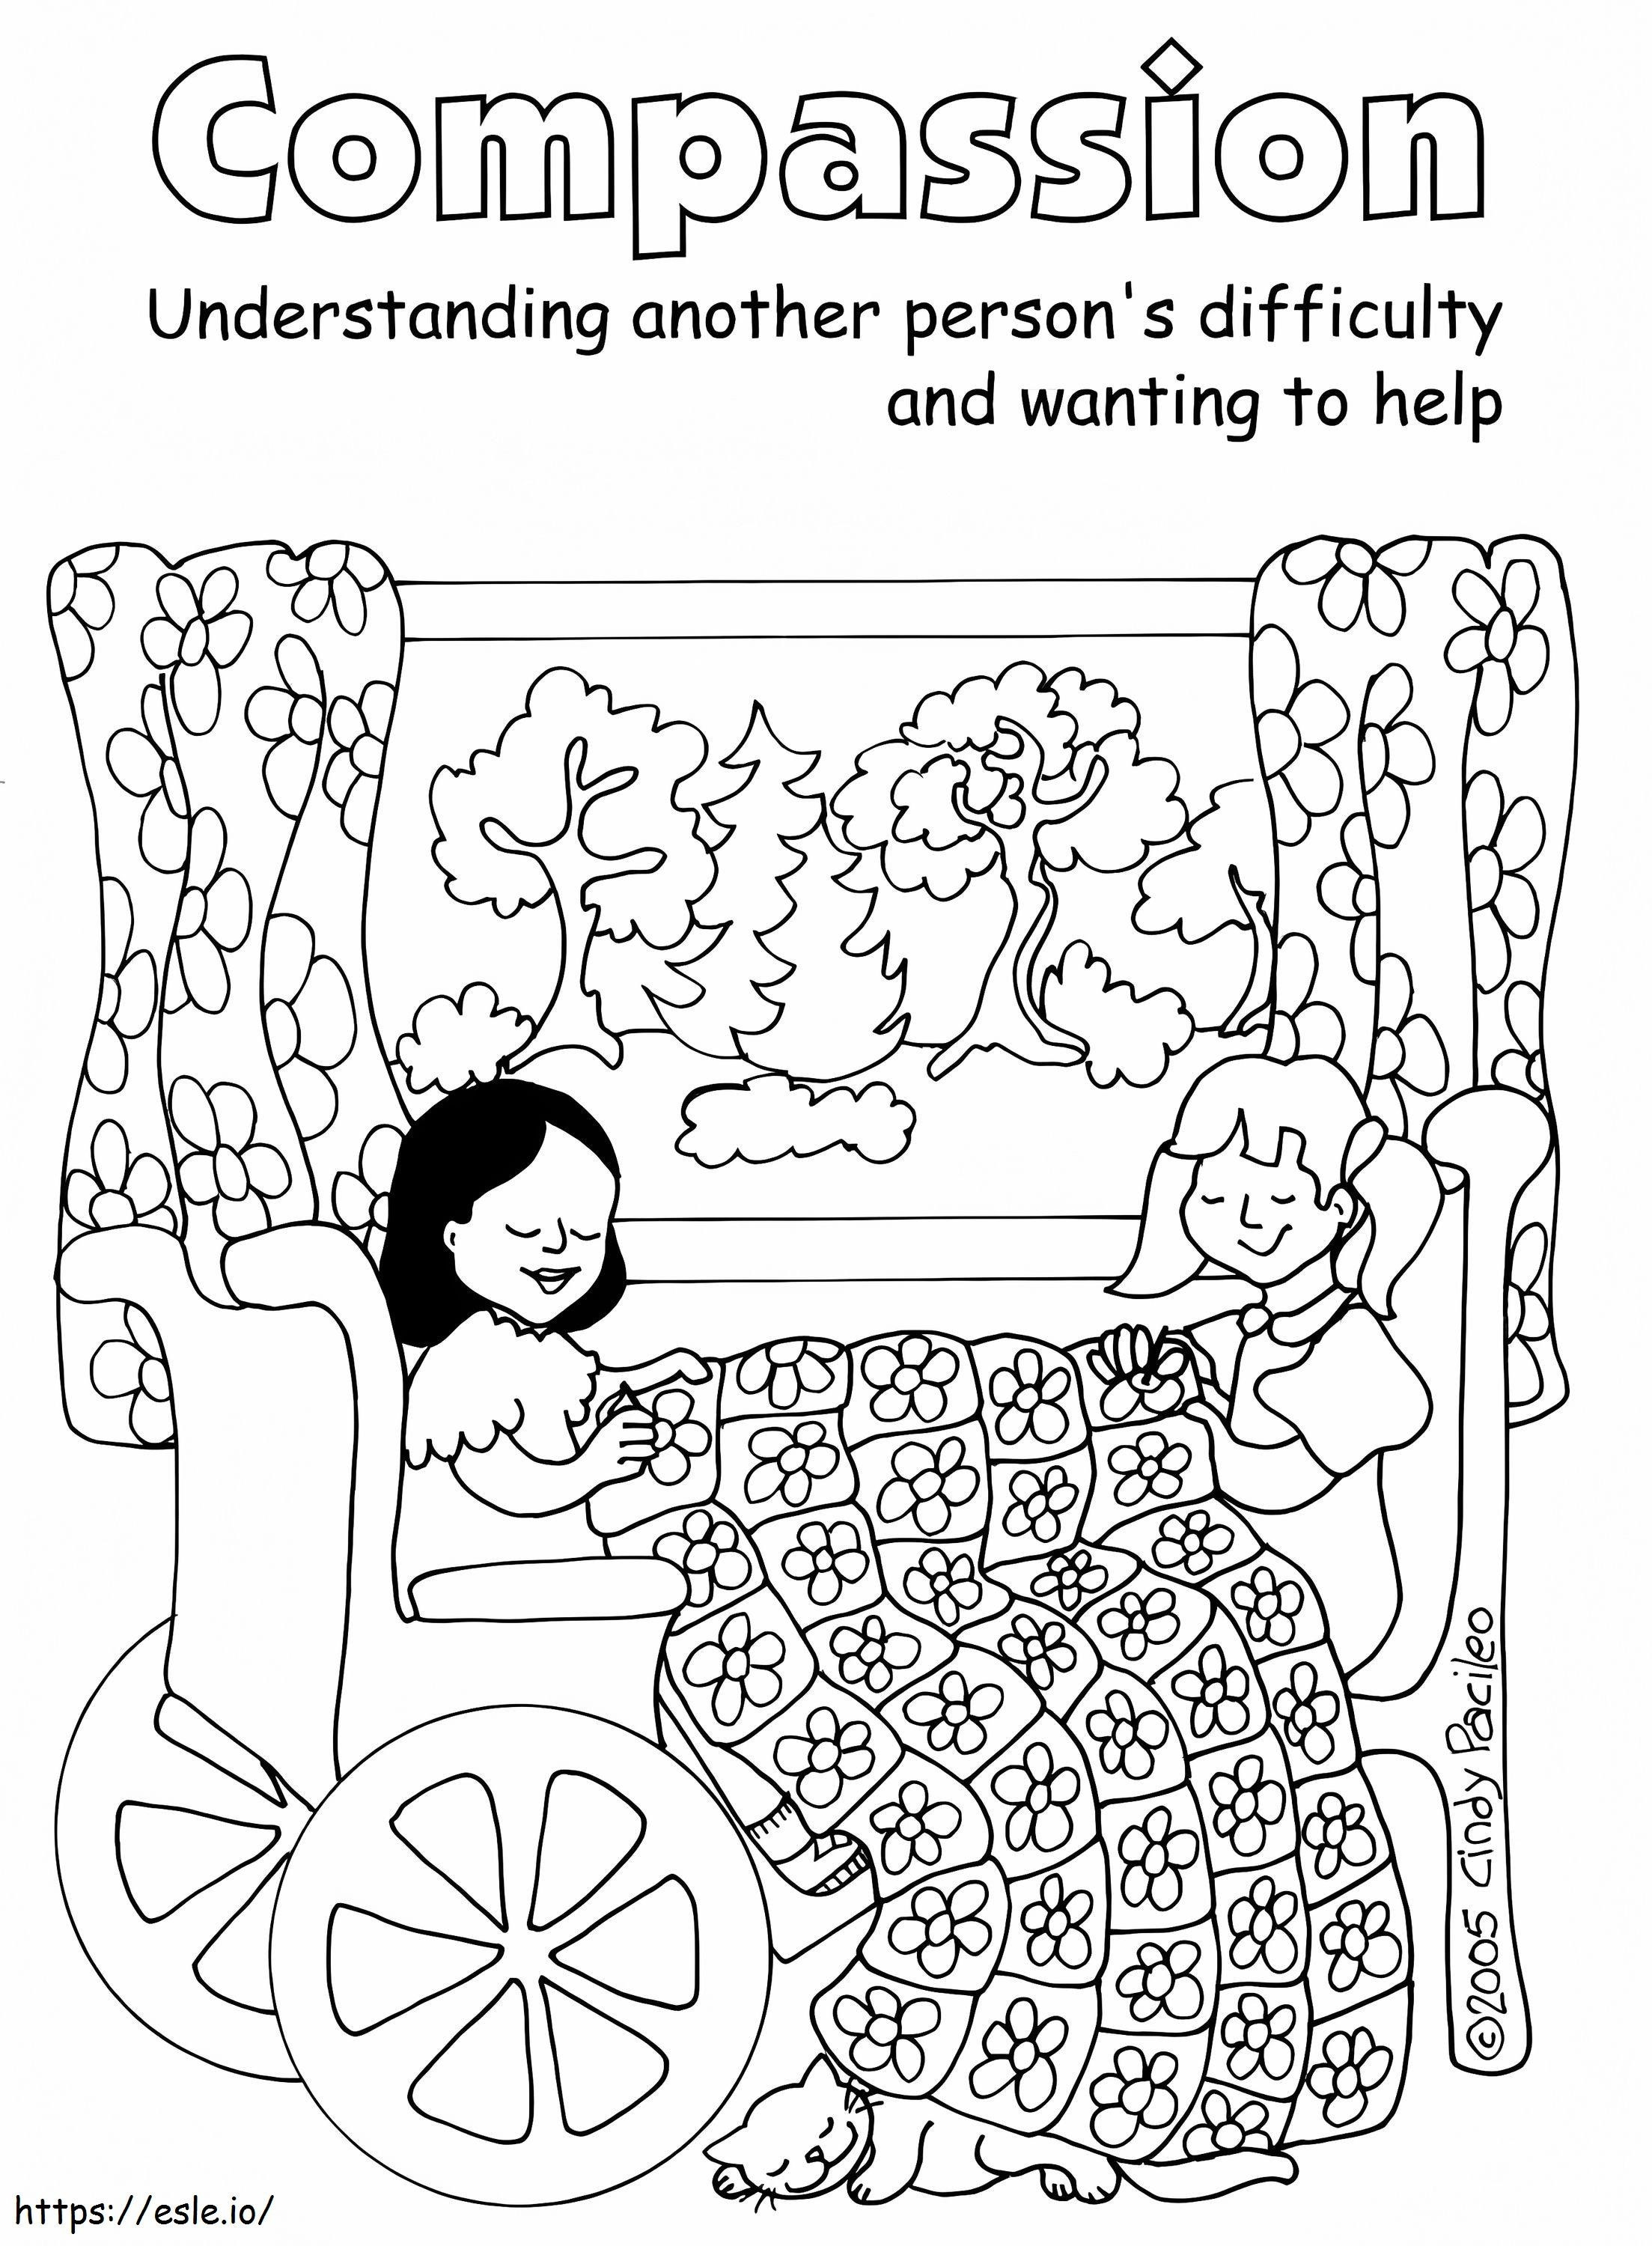 Printable Compassion coloring page